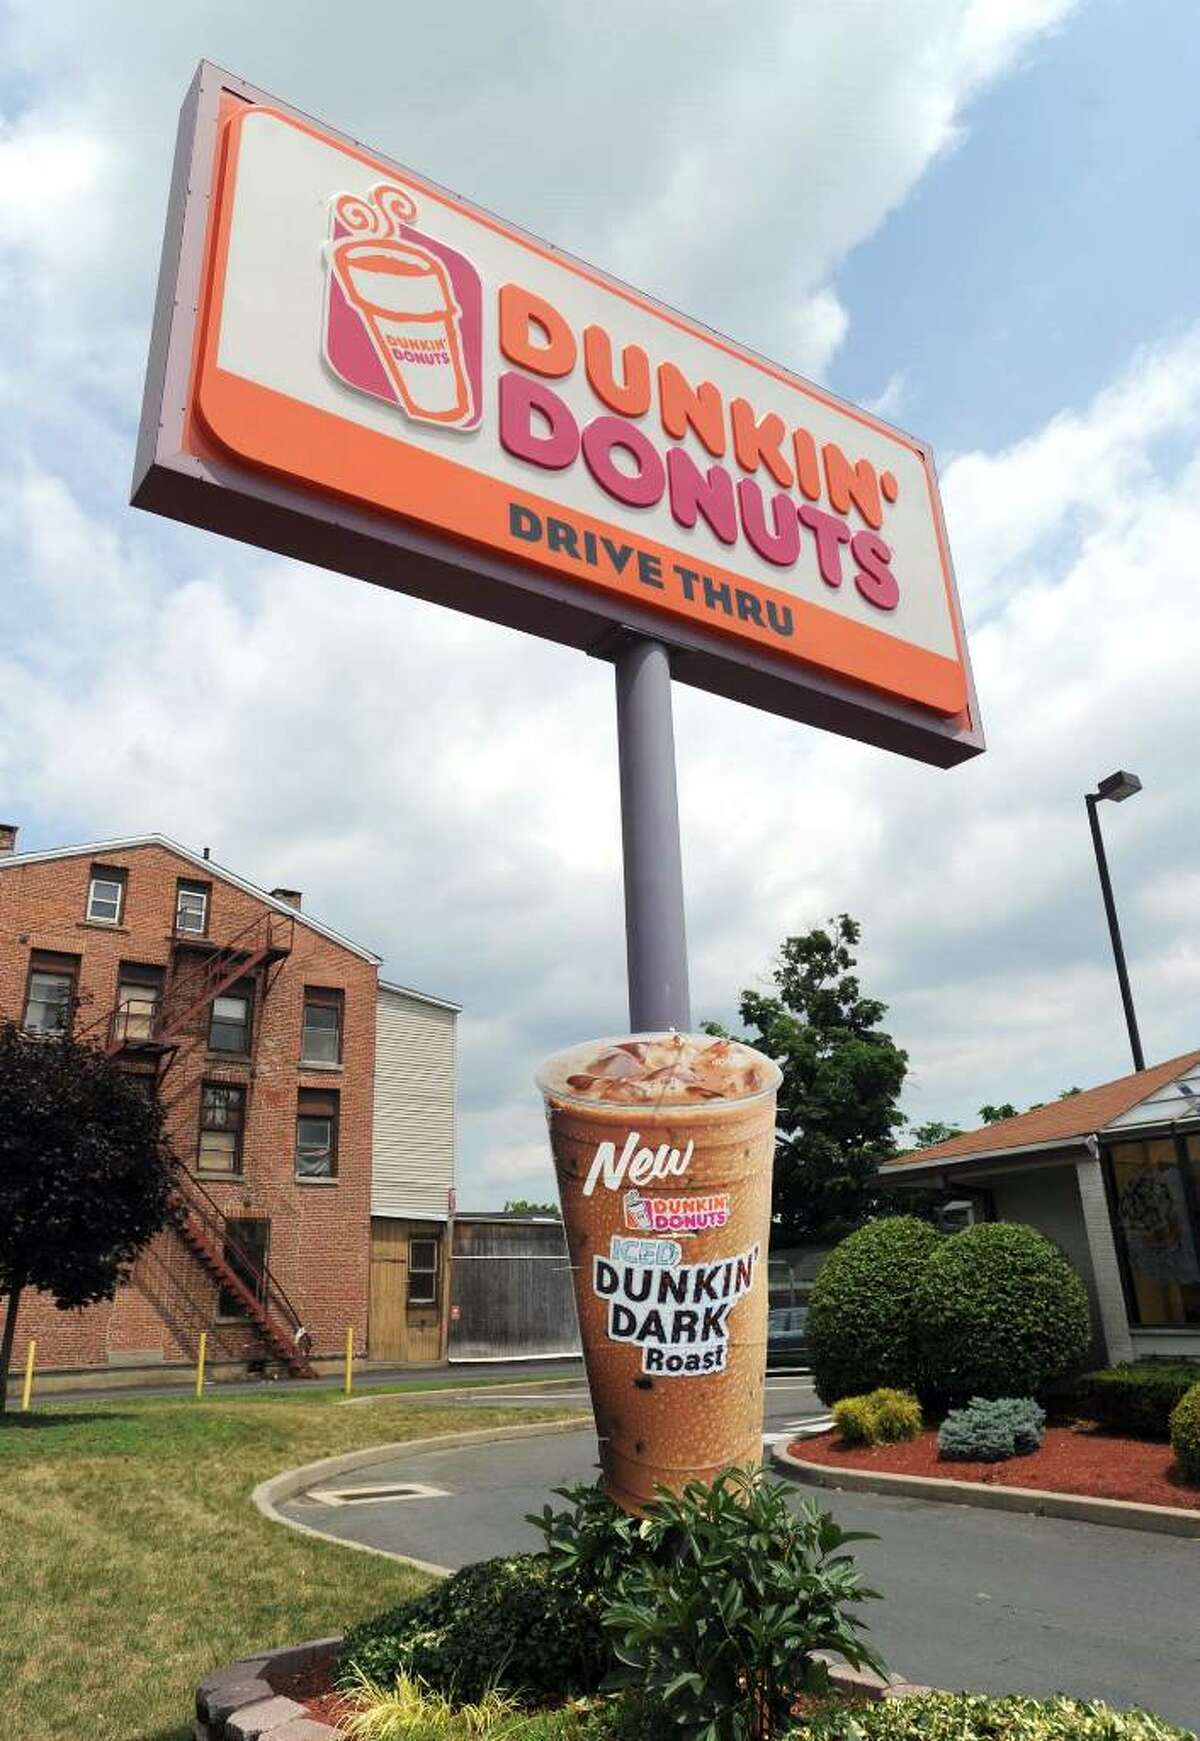 The offer is billed as a way to "kick off [the] post-Labor Day routine" and as a thank you to customers for keeping Dunkin' in business during the pandemic, according to a press release. One small iced coffee will be offered free of charge along with a any purchase between the hours of 12 p.m. and 6 p.m. on that day. The giveaway is available in person or via the Dunkin' app to residents of Fairfield and Westchester Counties as well as other areas of New York and New Jersey.